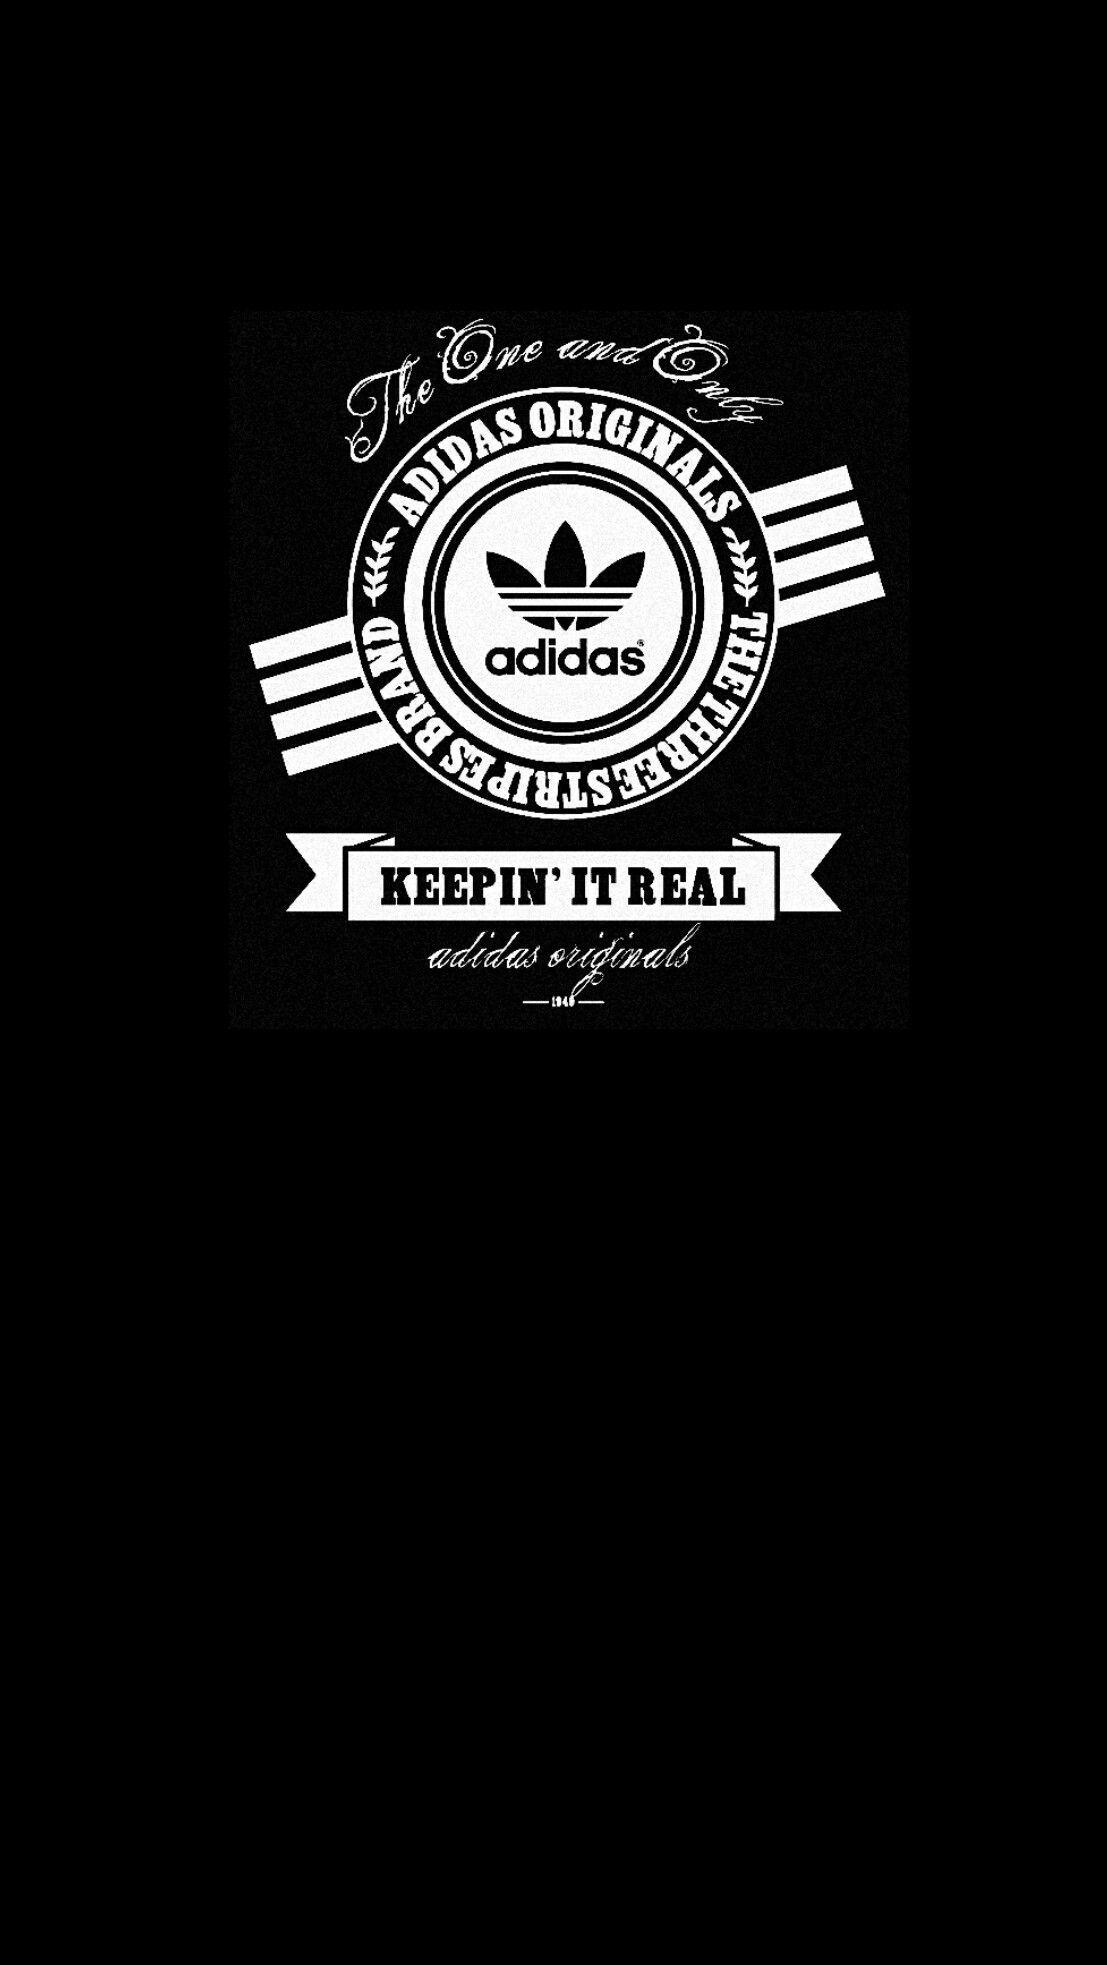 Camo Adidas Logo - adidas #camouflage #wallpaper #iPhone #android | Adidas in 2019 ...